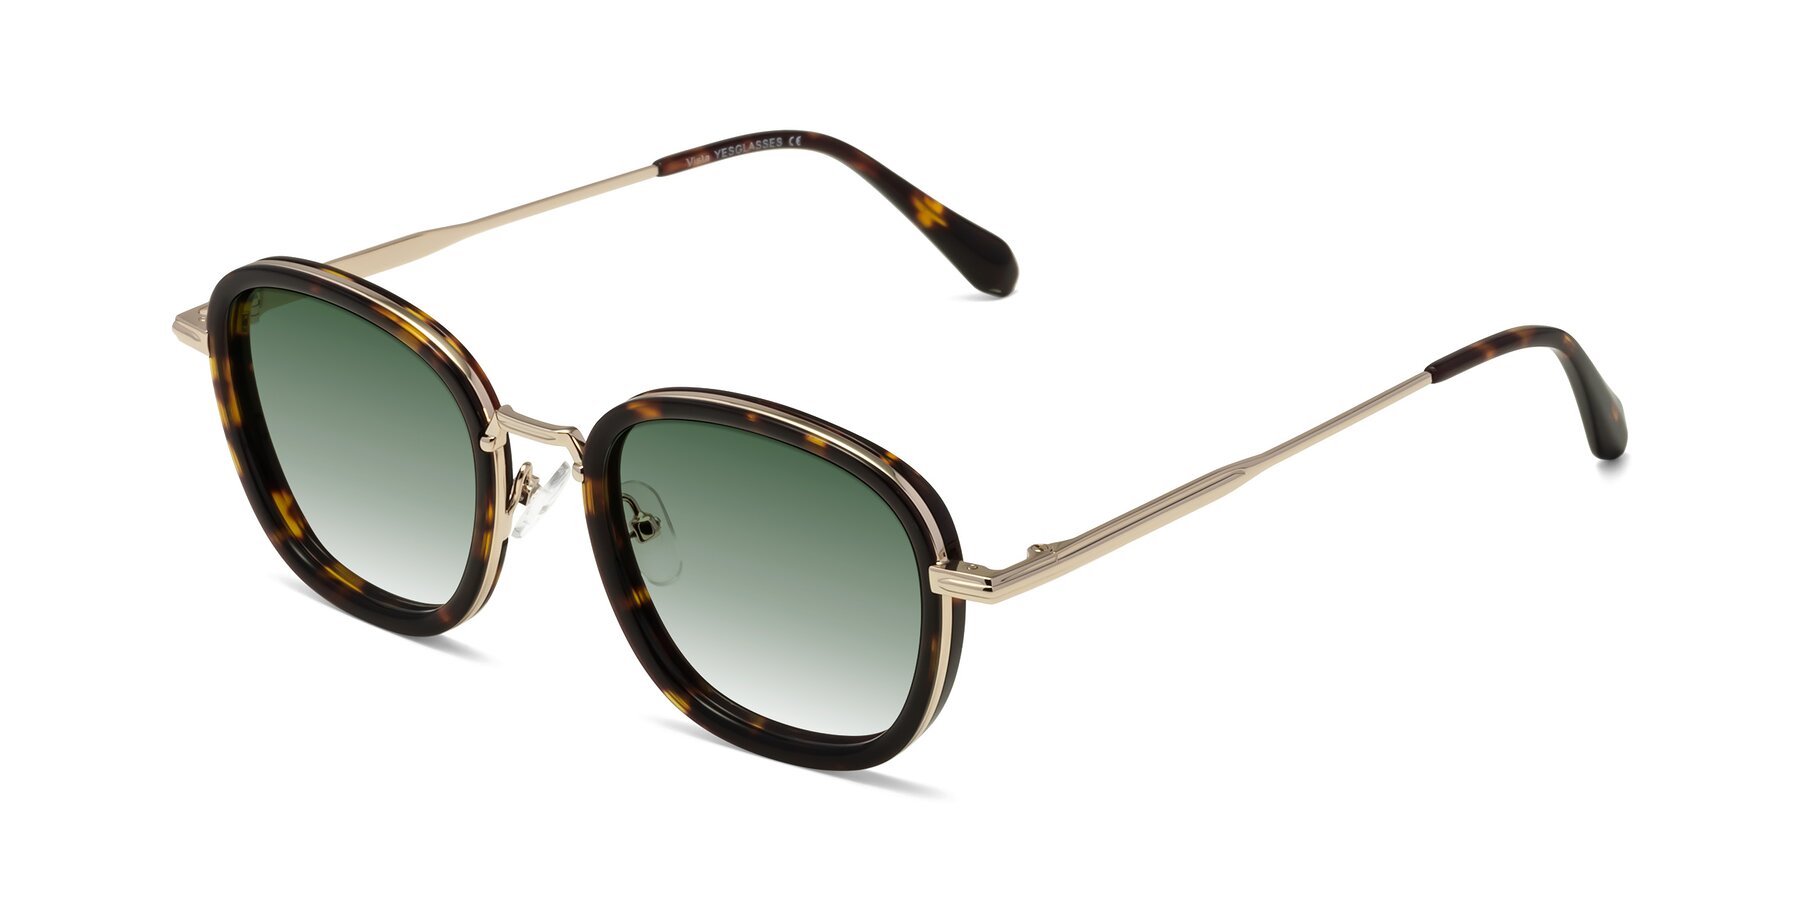 Angle of Vista in Tortoise-Light Gold with Green Gradient Lenses